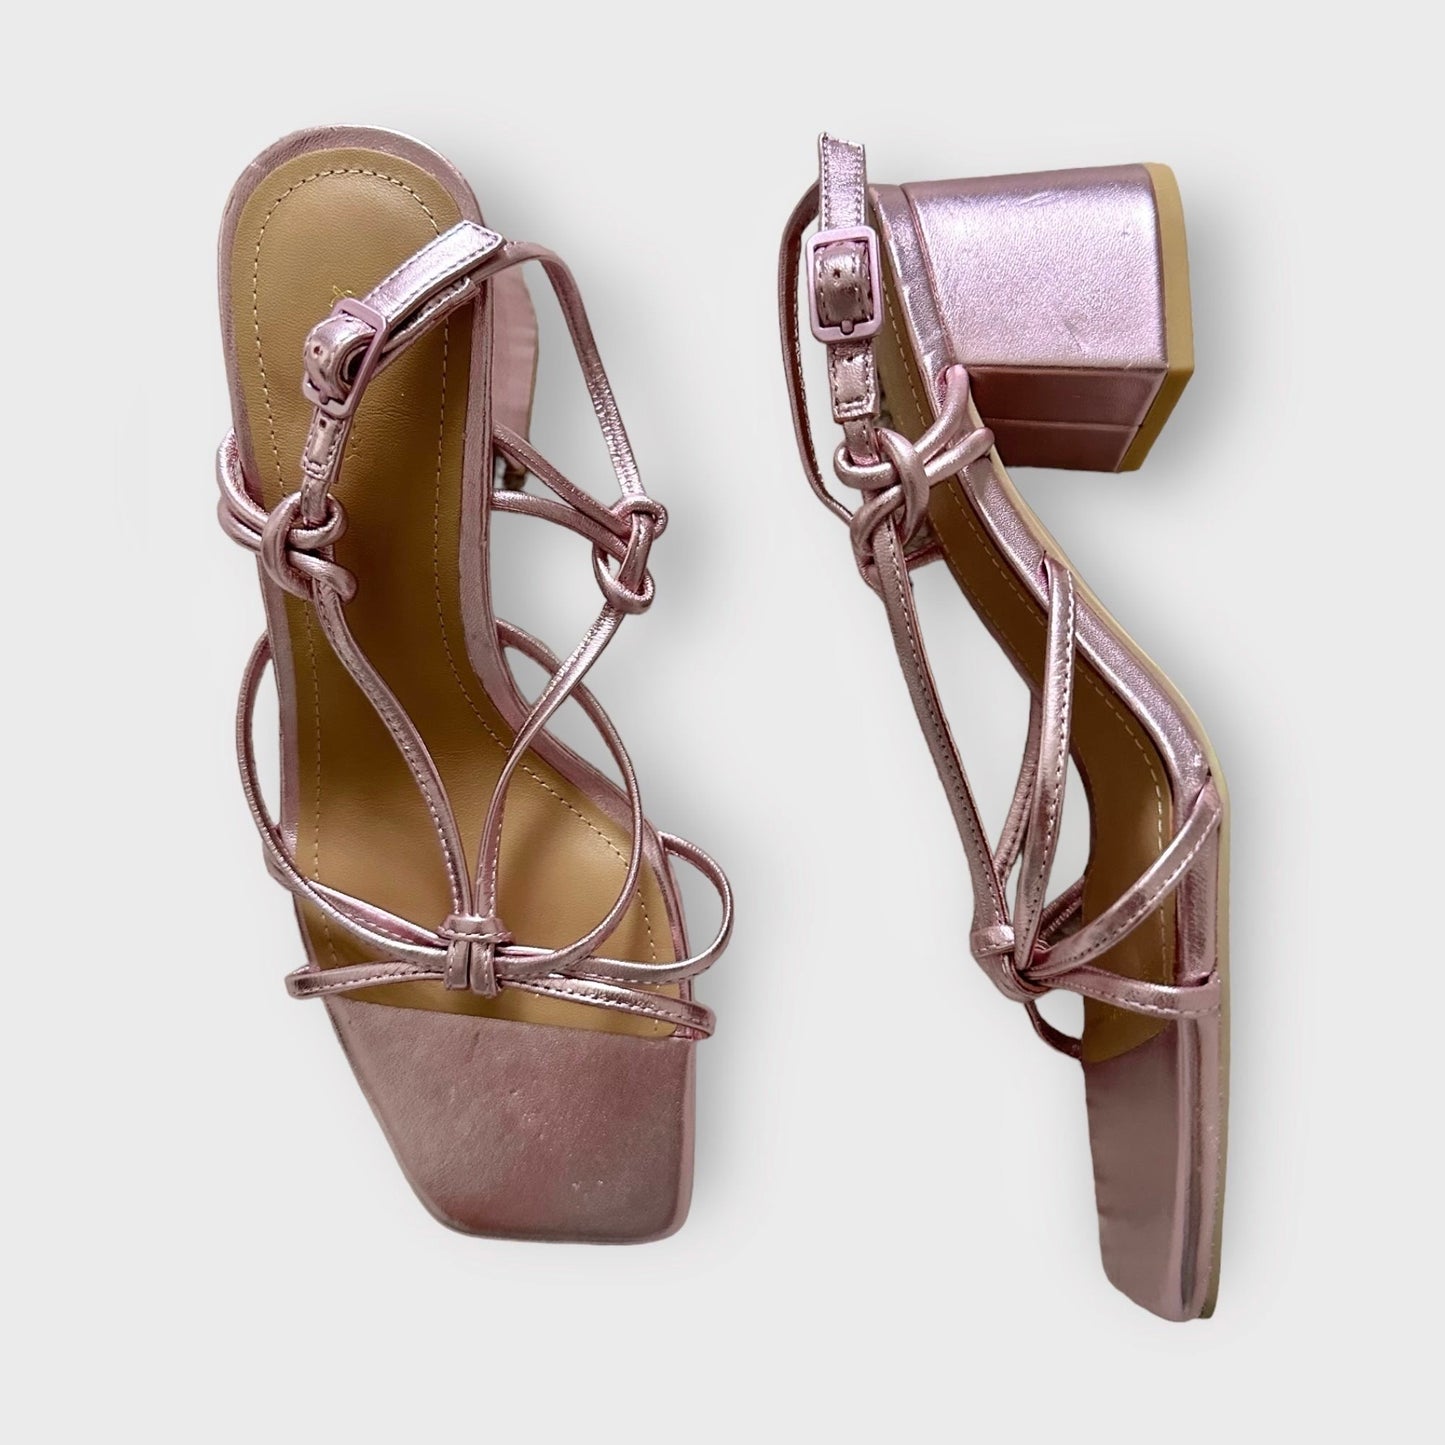 & Other Stories pink metallic strappy party shoes sandals leather wedding guest new EU 37 UK 4